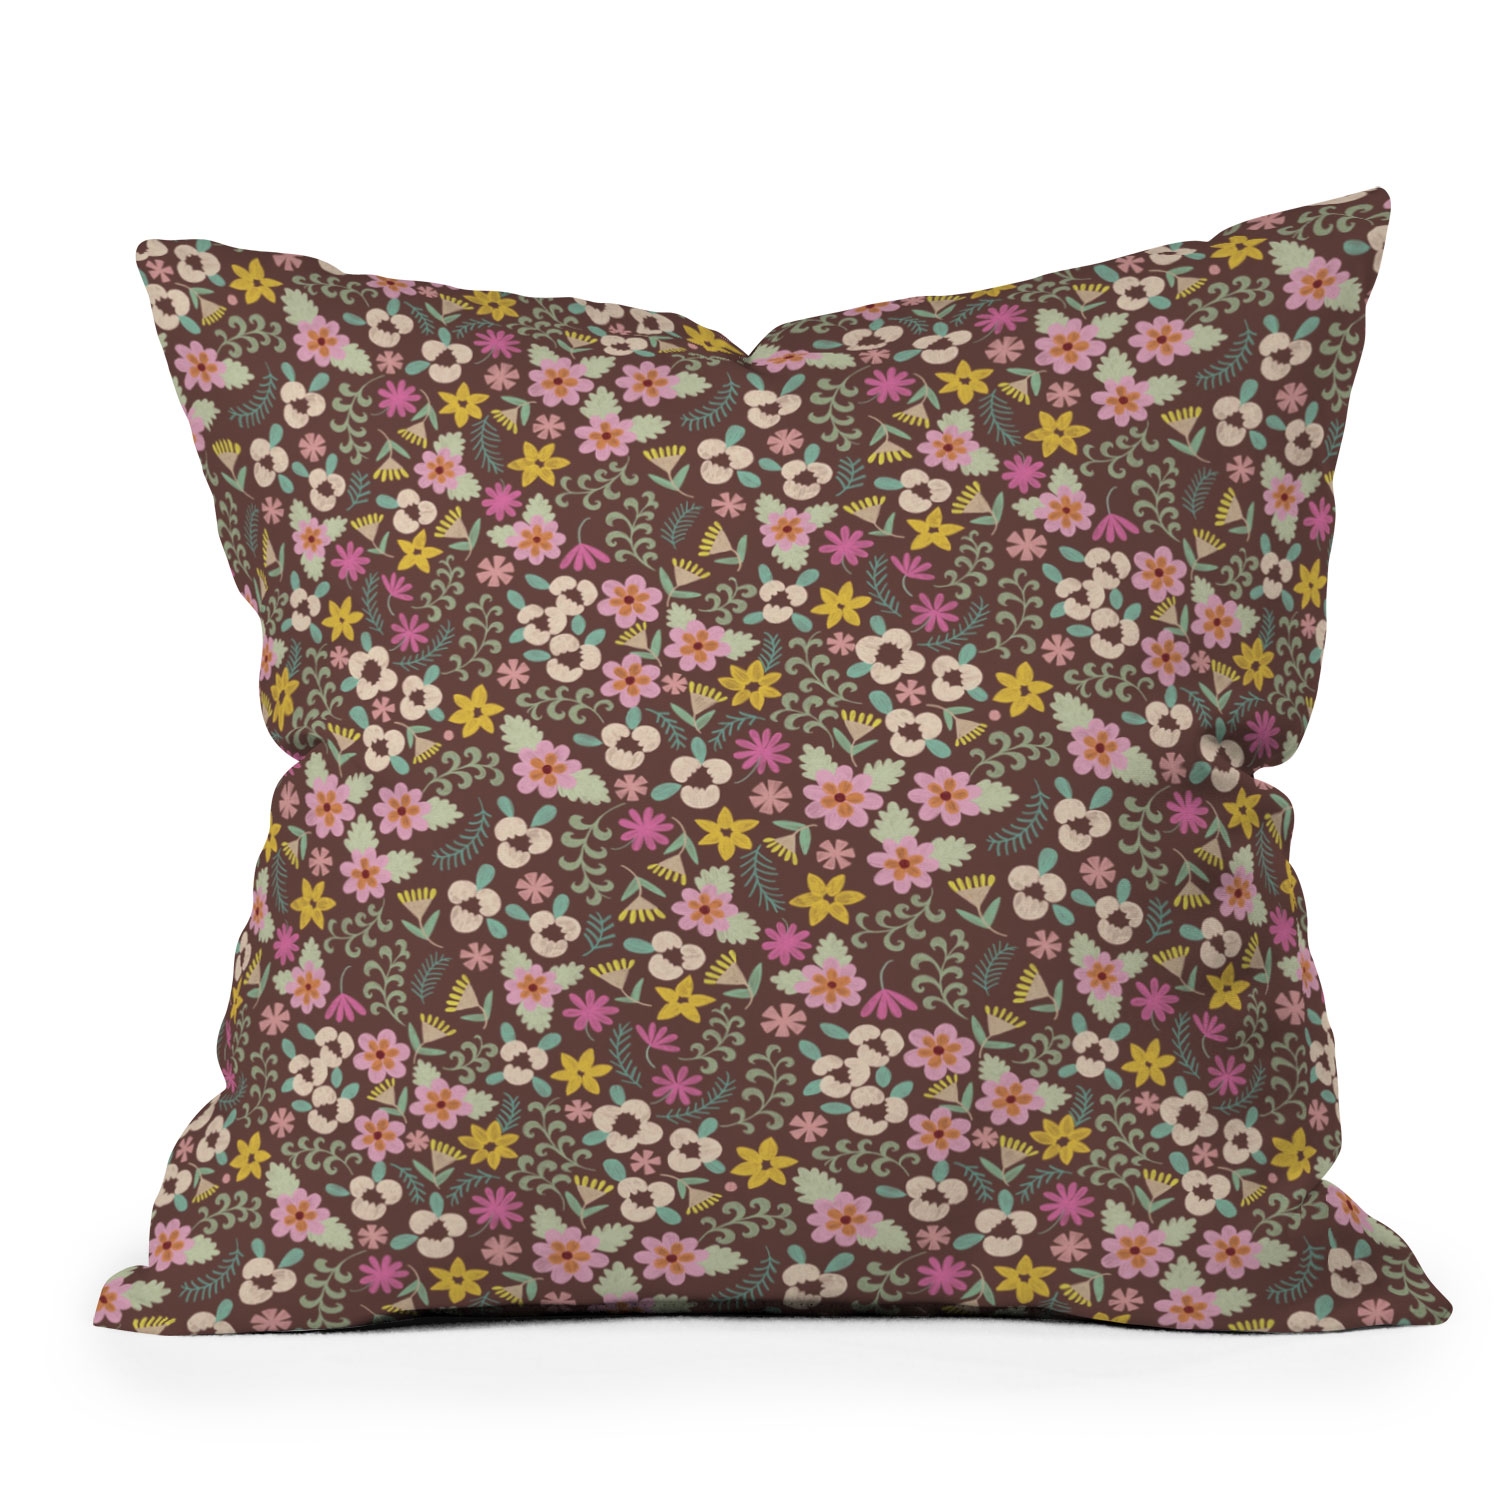 Ditsy Floral 3 by Pimlada Phuapradit - Outdoor Throw Pillow 20" x 20" - Image 3